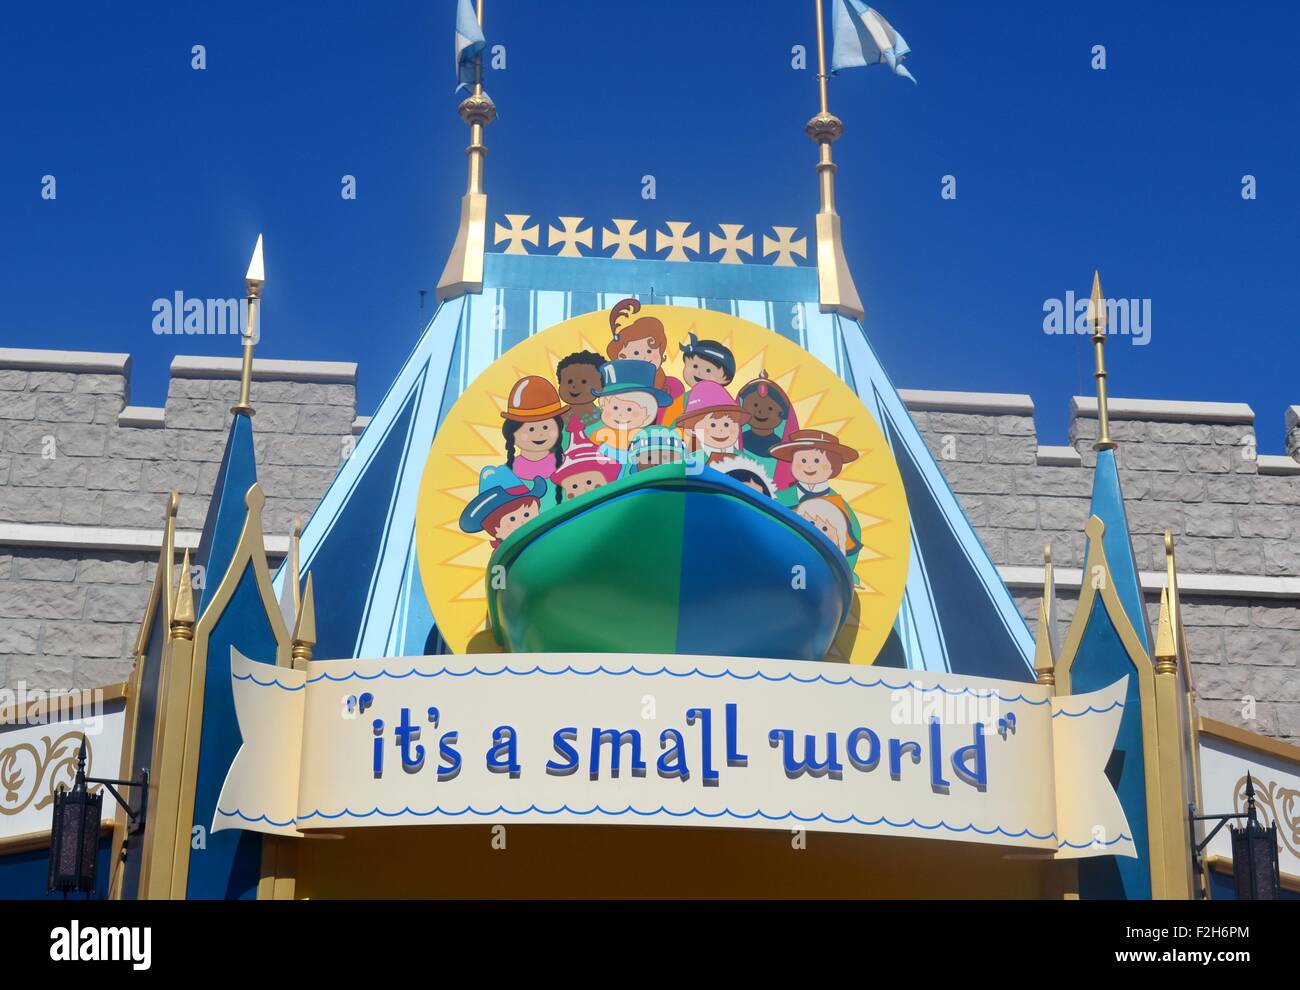 Sign for Its a Small World ride in Disneyland, Florida, USA Stock Photo